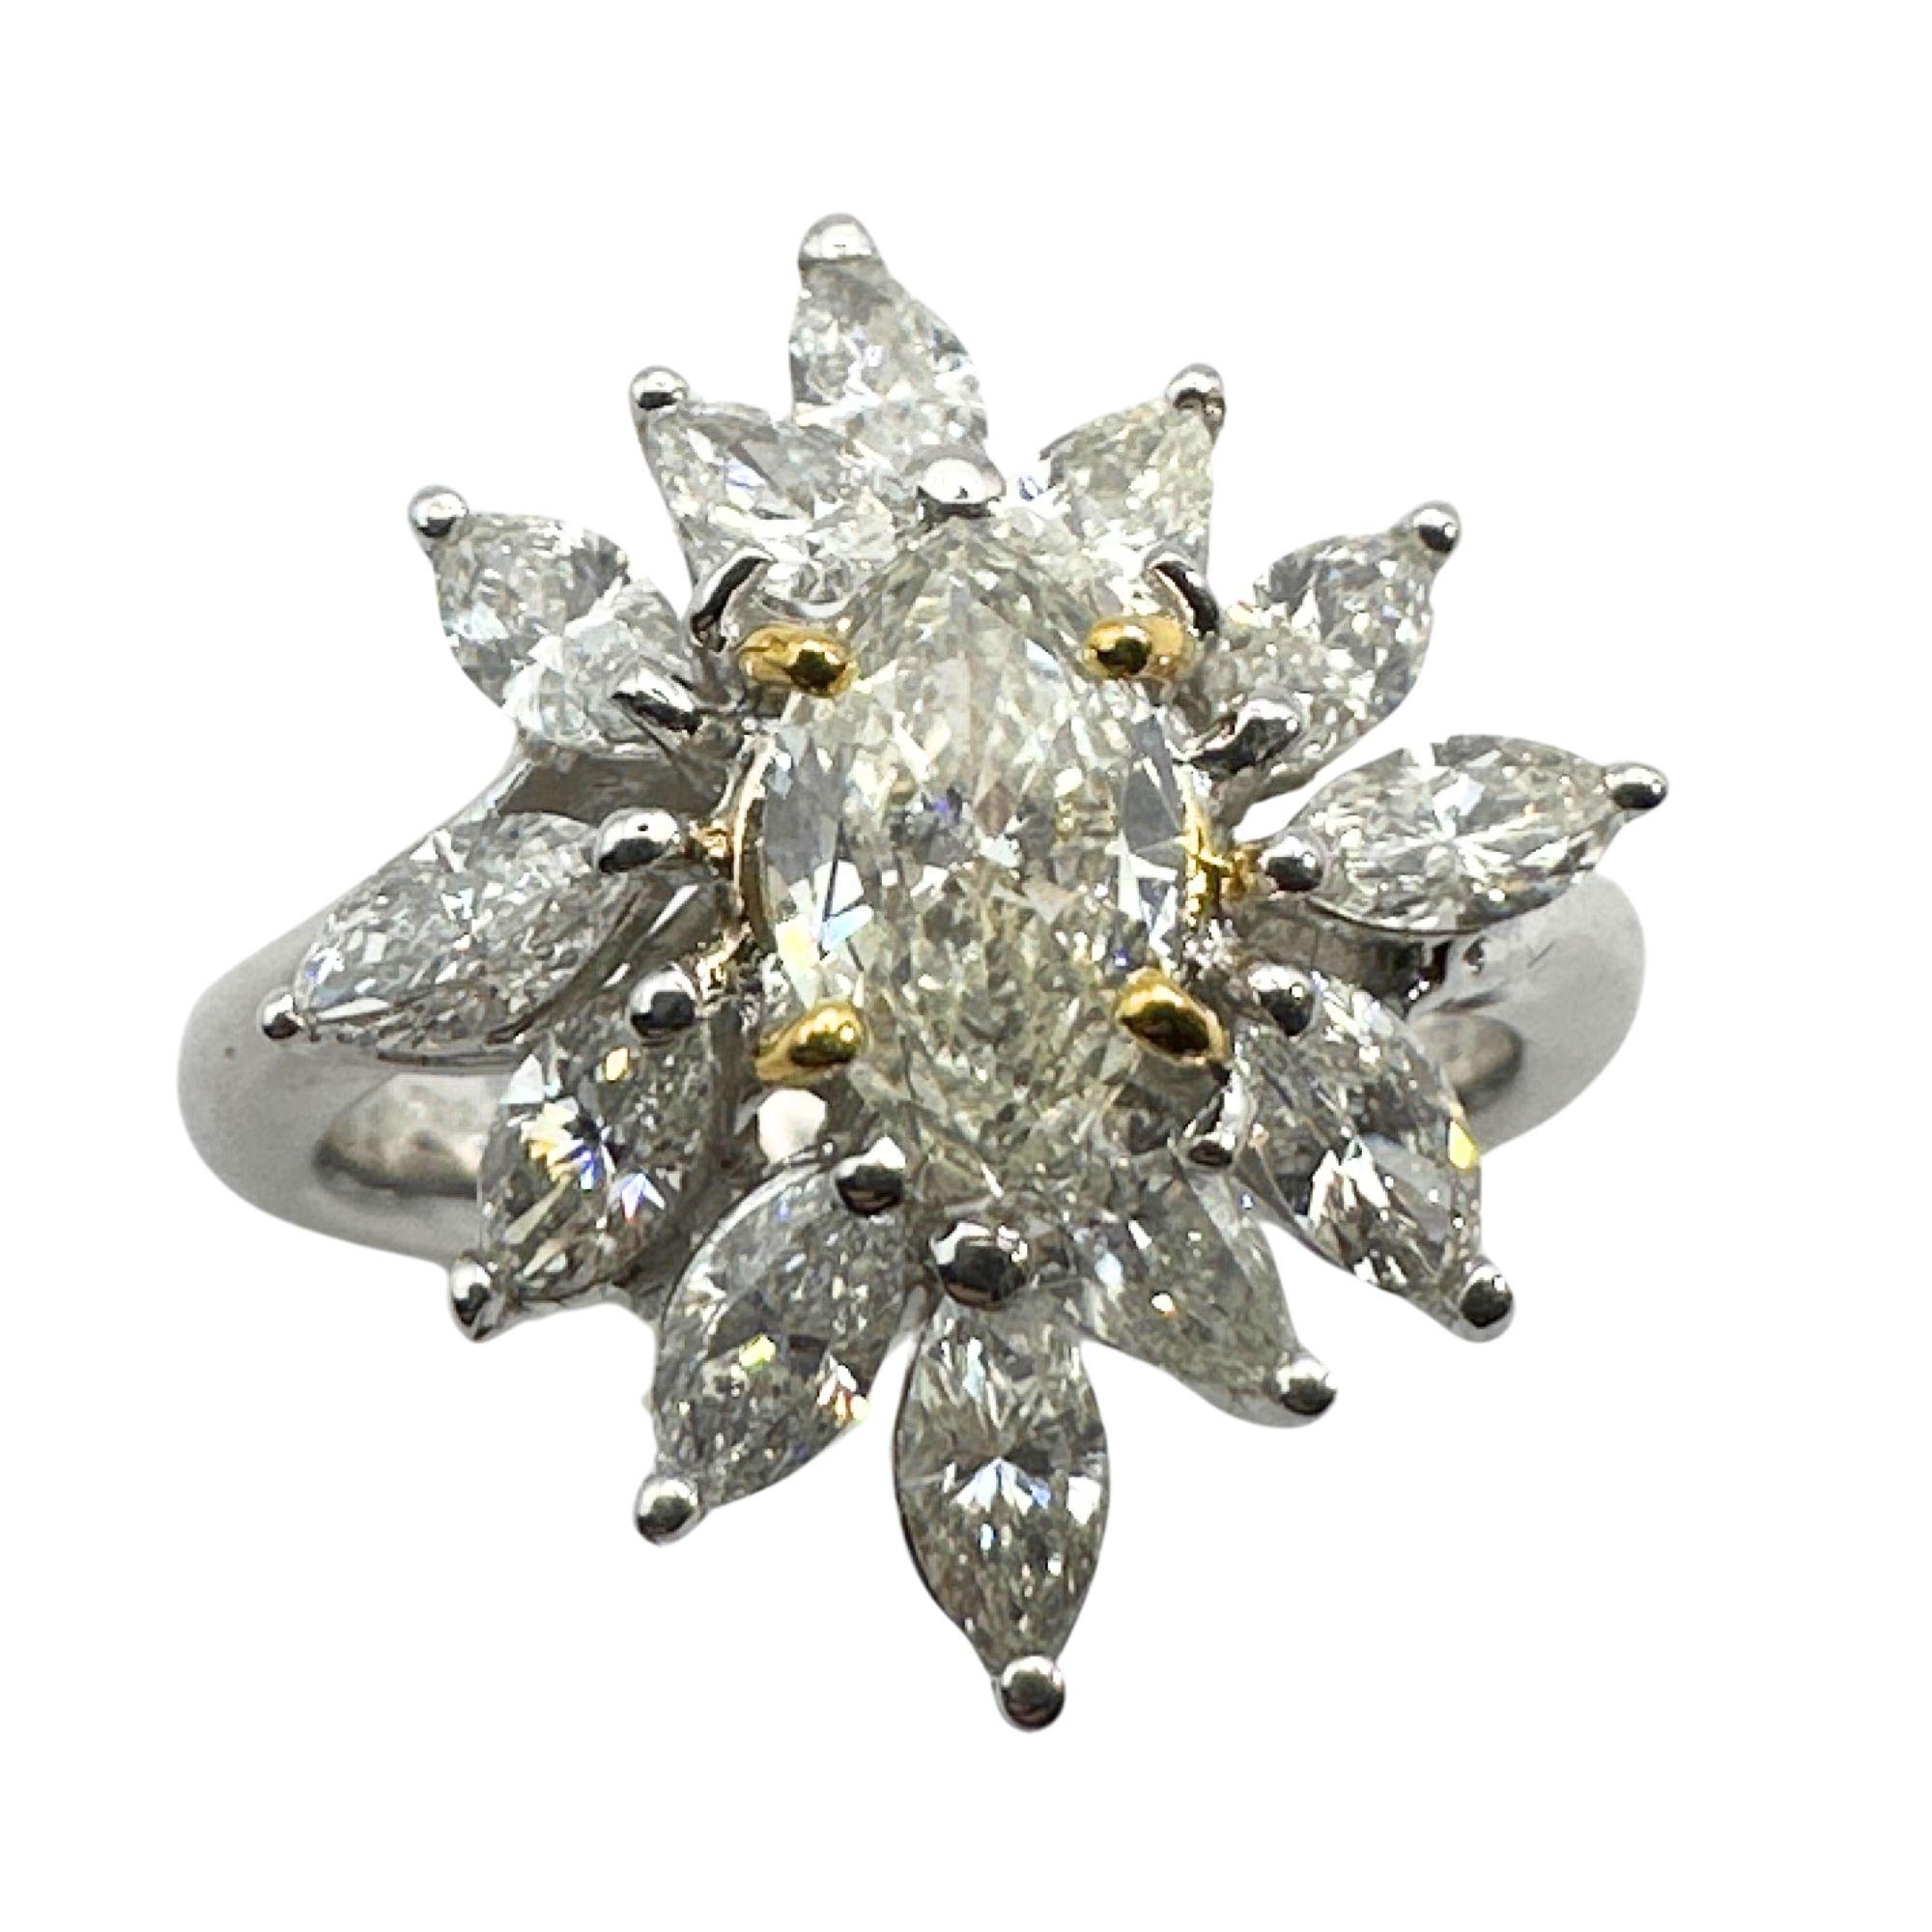 This 18k Diamond Ring is the perfect blend of elegance and sophistication. Made with 18k white and yellow gold, it features stunning 1.59 carats of diamonds. With a ring size of 6.25 and a weight of 5.8 grams, this ring is in good condition with